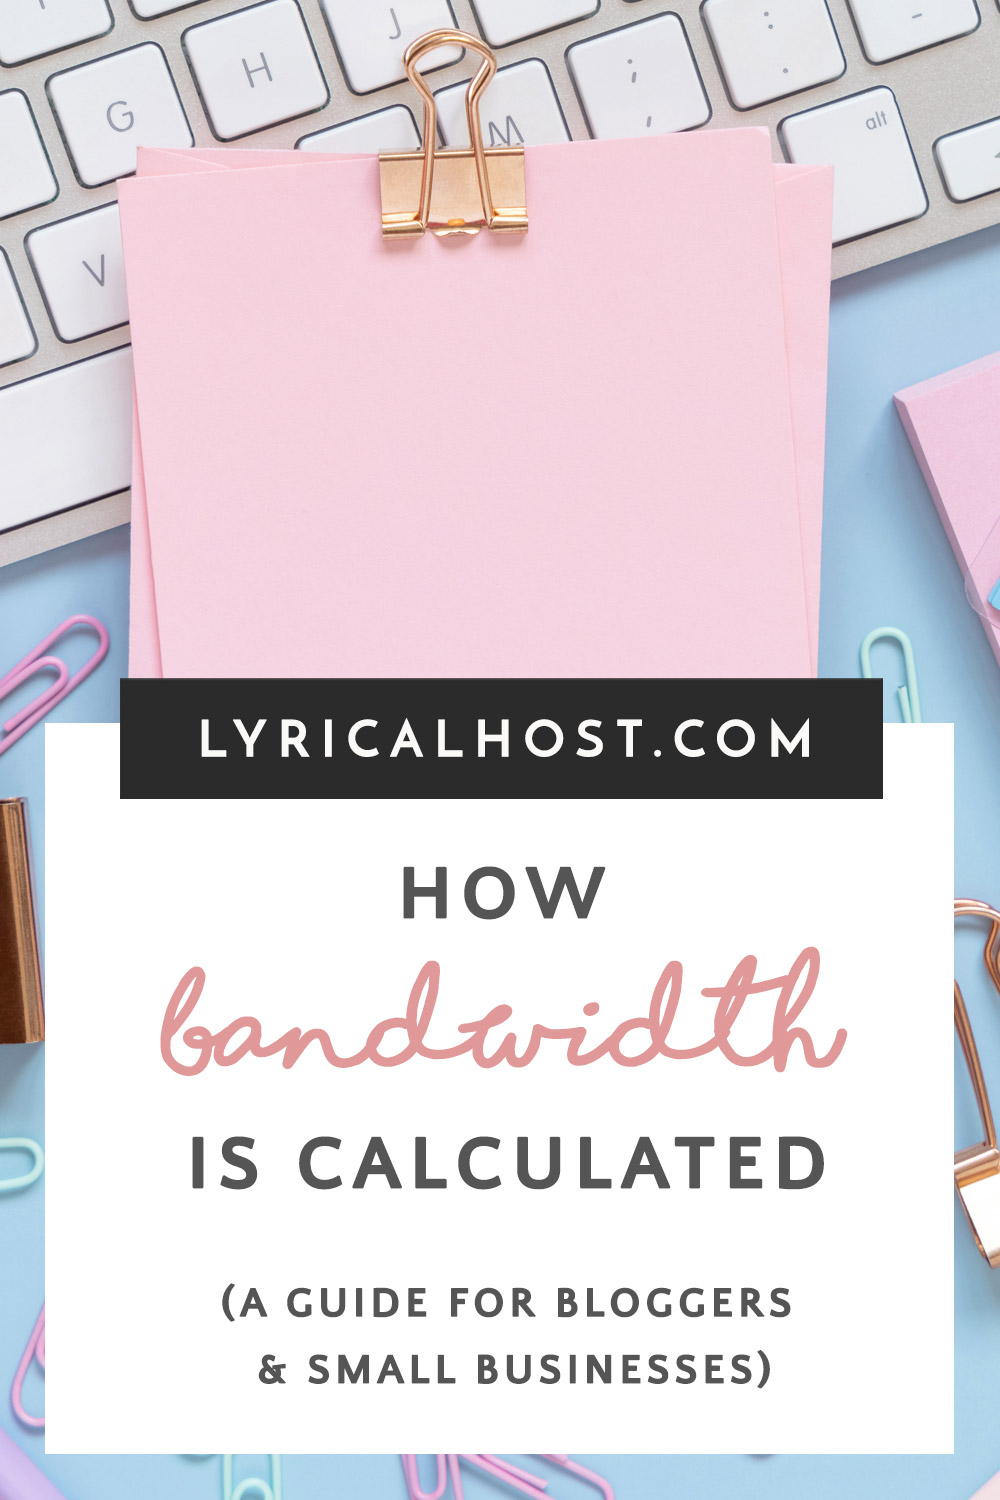 How Bandwidth Is Calculated: A Guide For Bloggers & Small Businesses